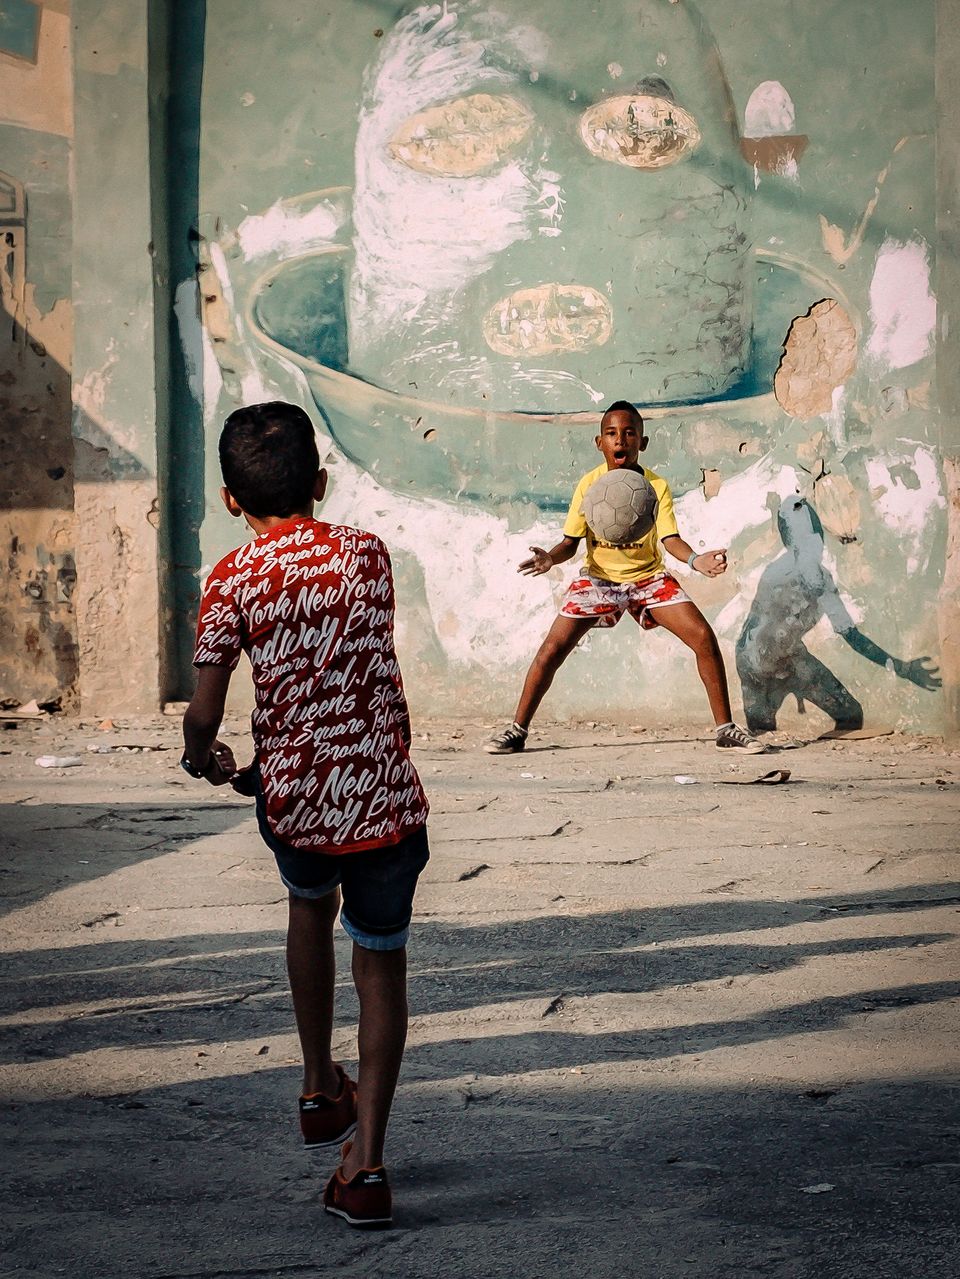 Sport category: Children play football in the street in Havana in this